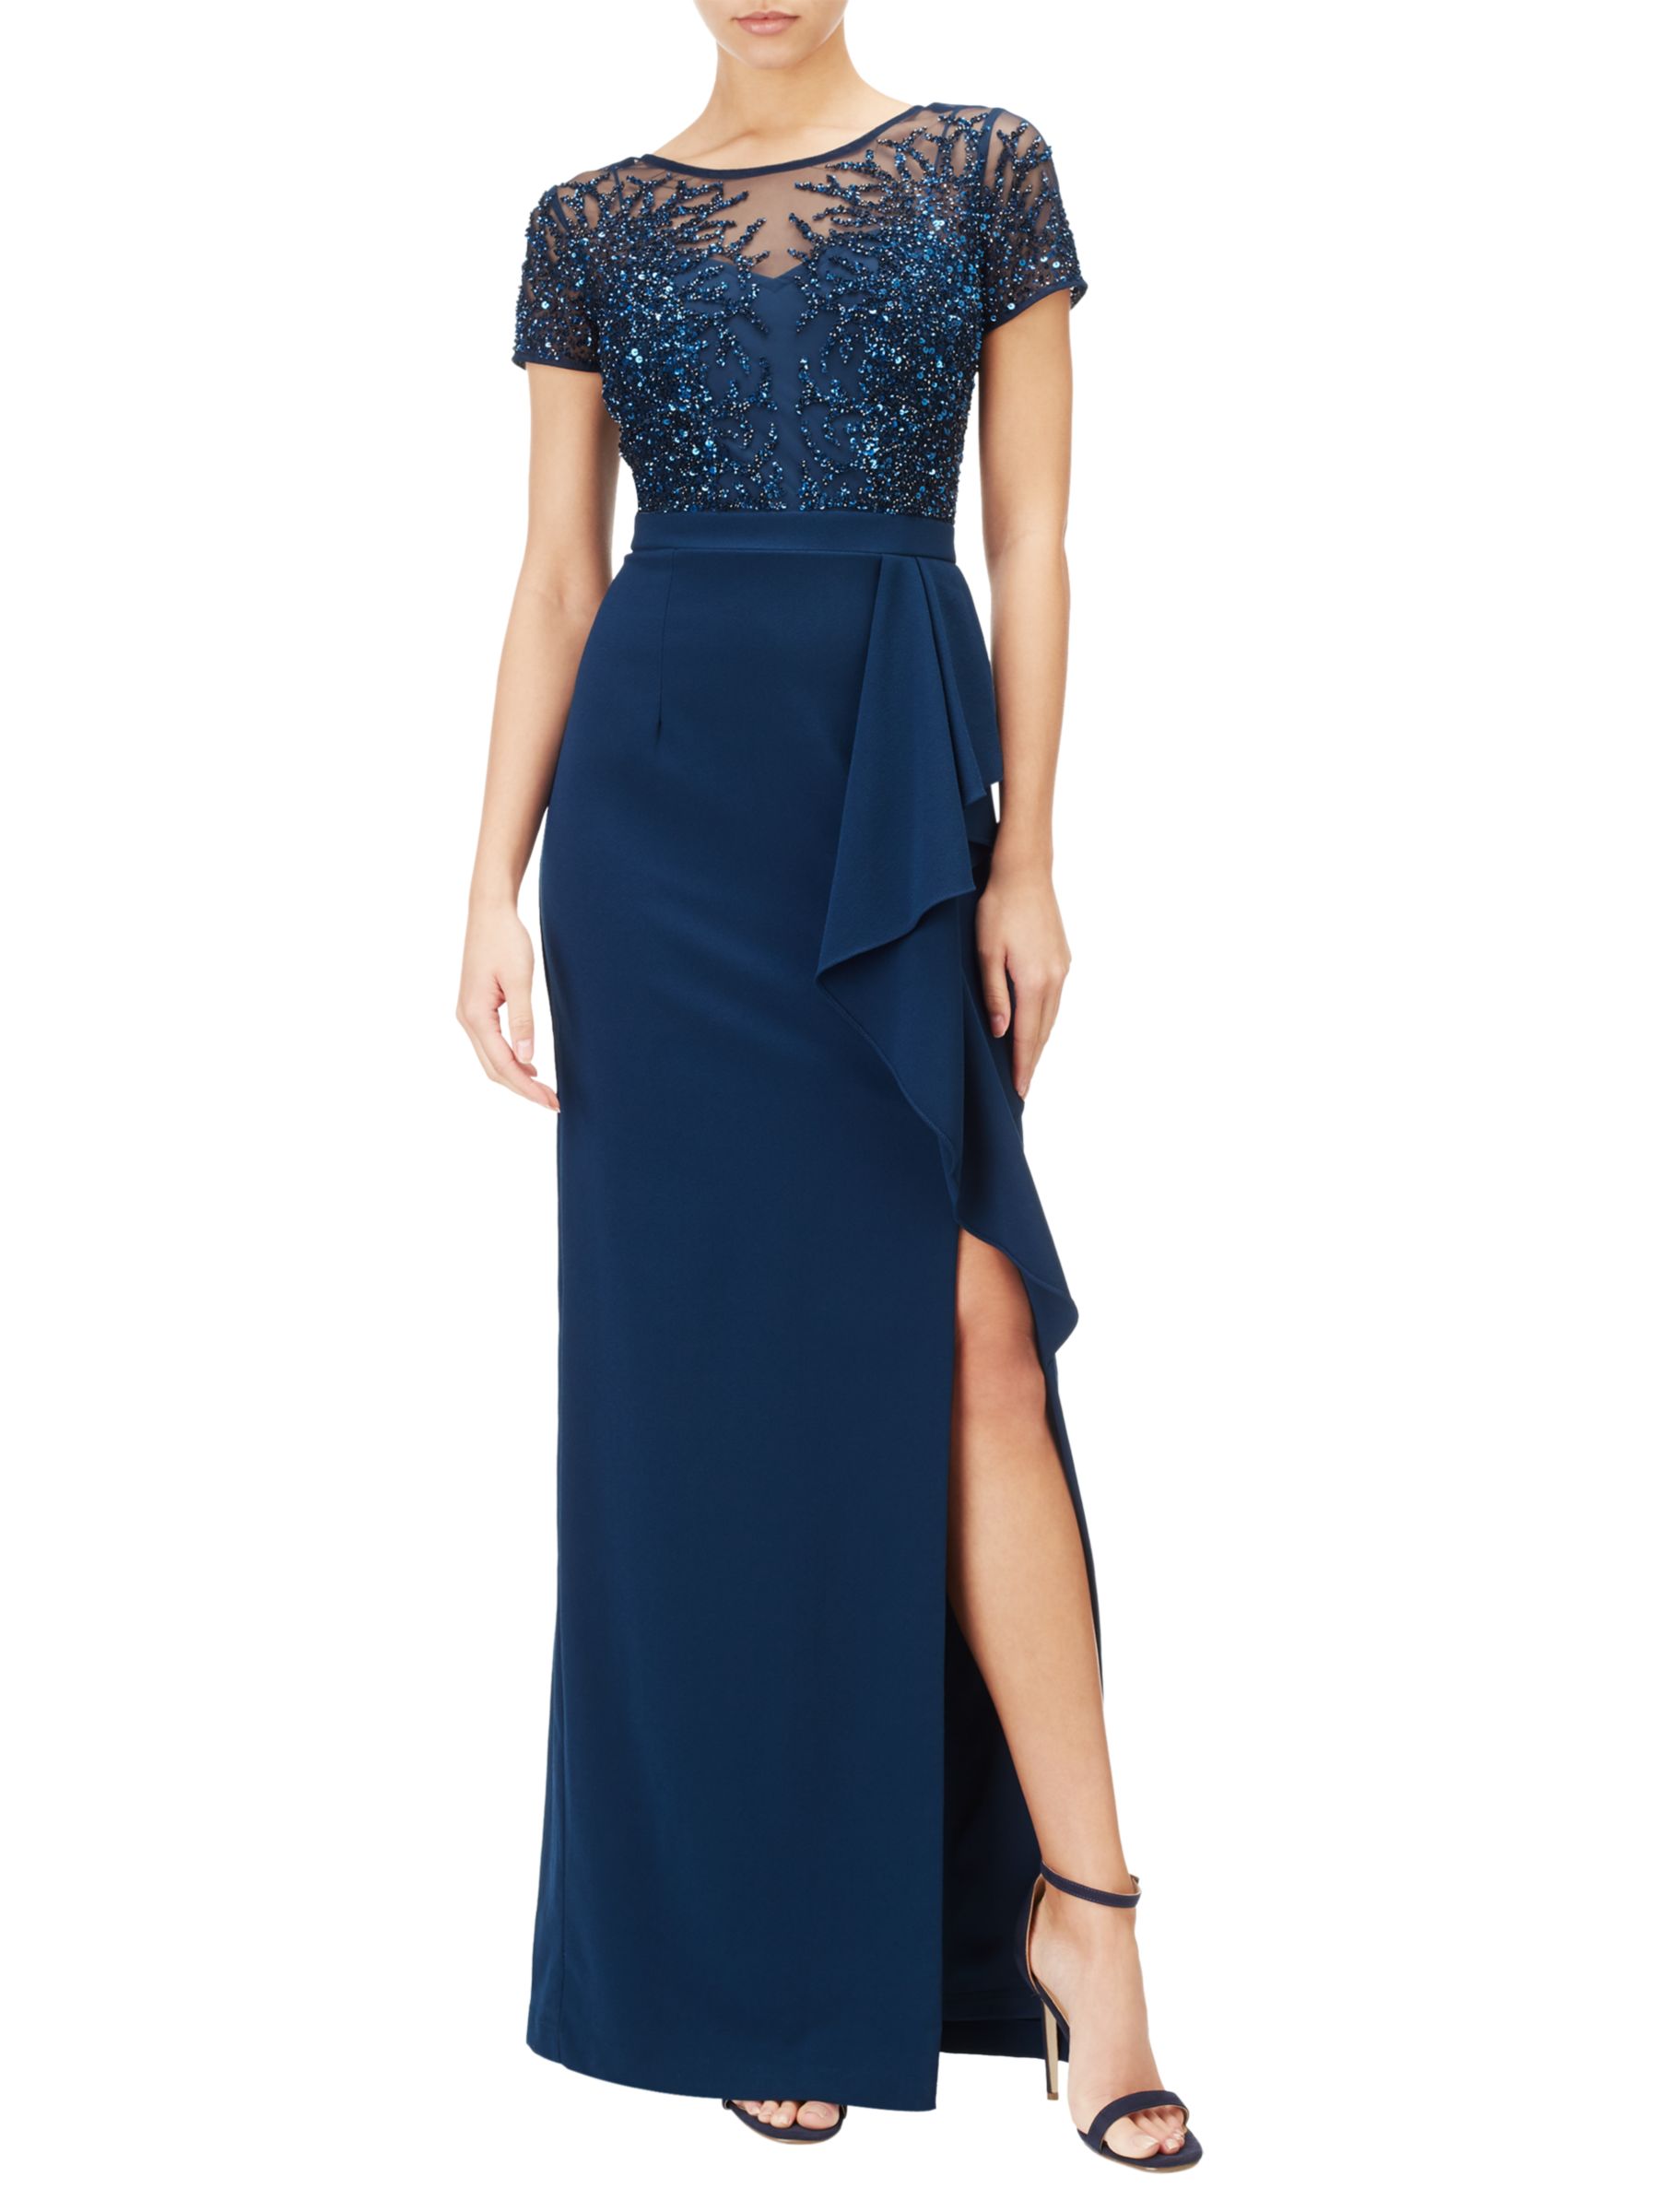 Adrianna Papell Petite Beaded Gown, Deep Blue